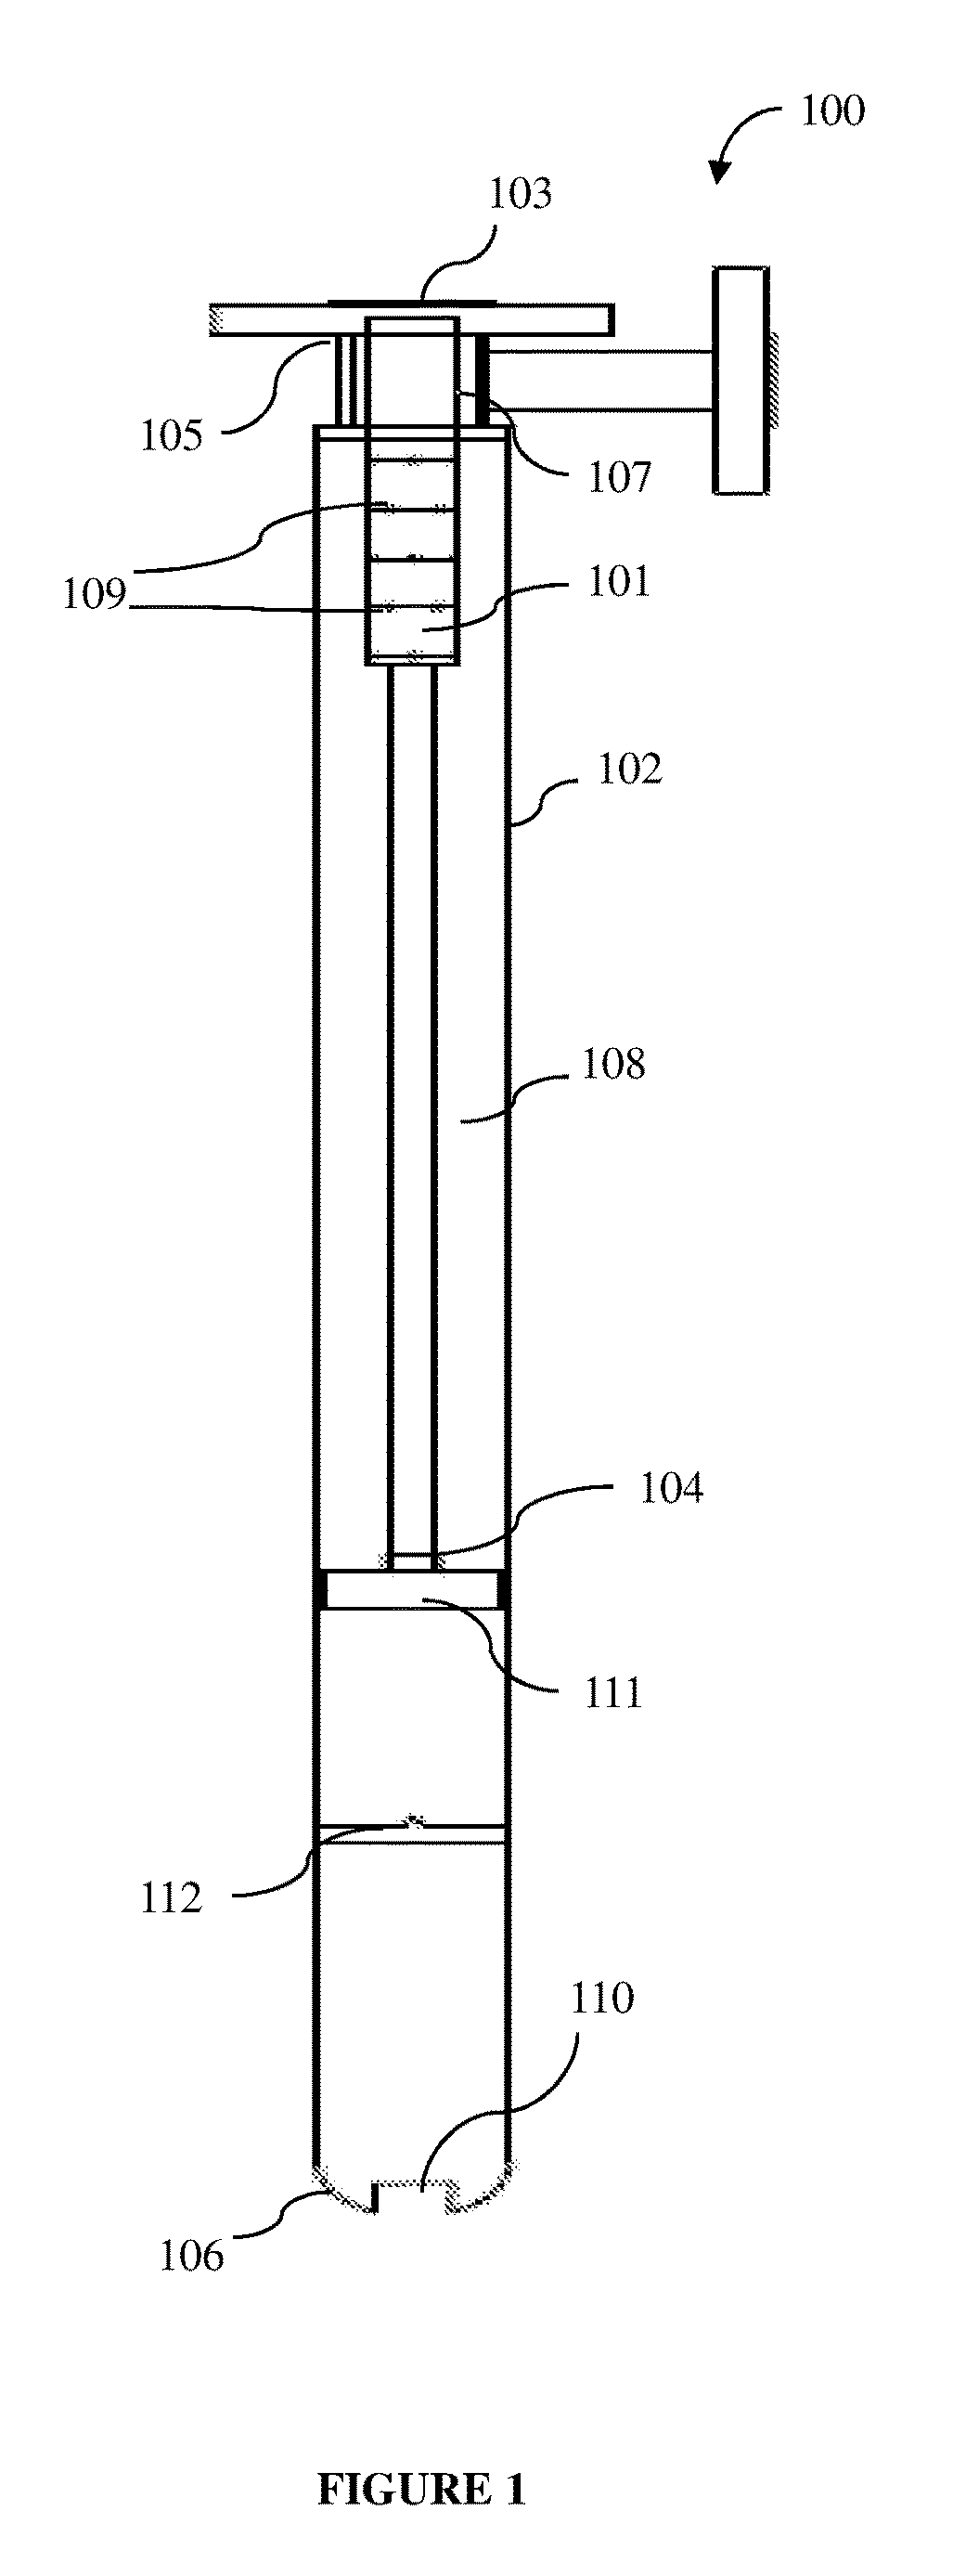 Method and apparatus for mixing and atomizing a hydrocarbon stream using a diluent/dispersion stream